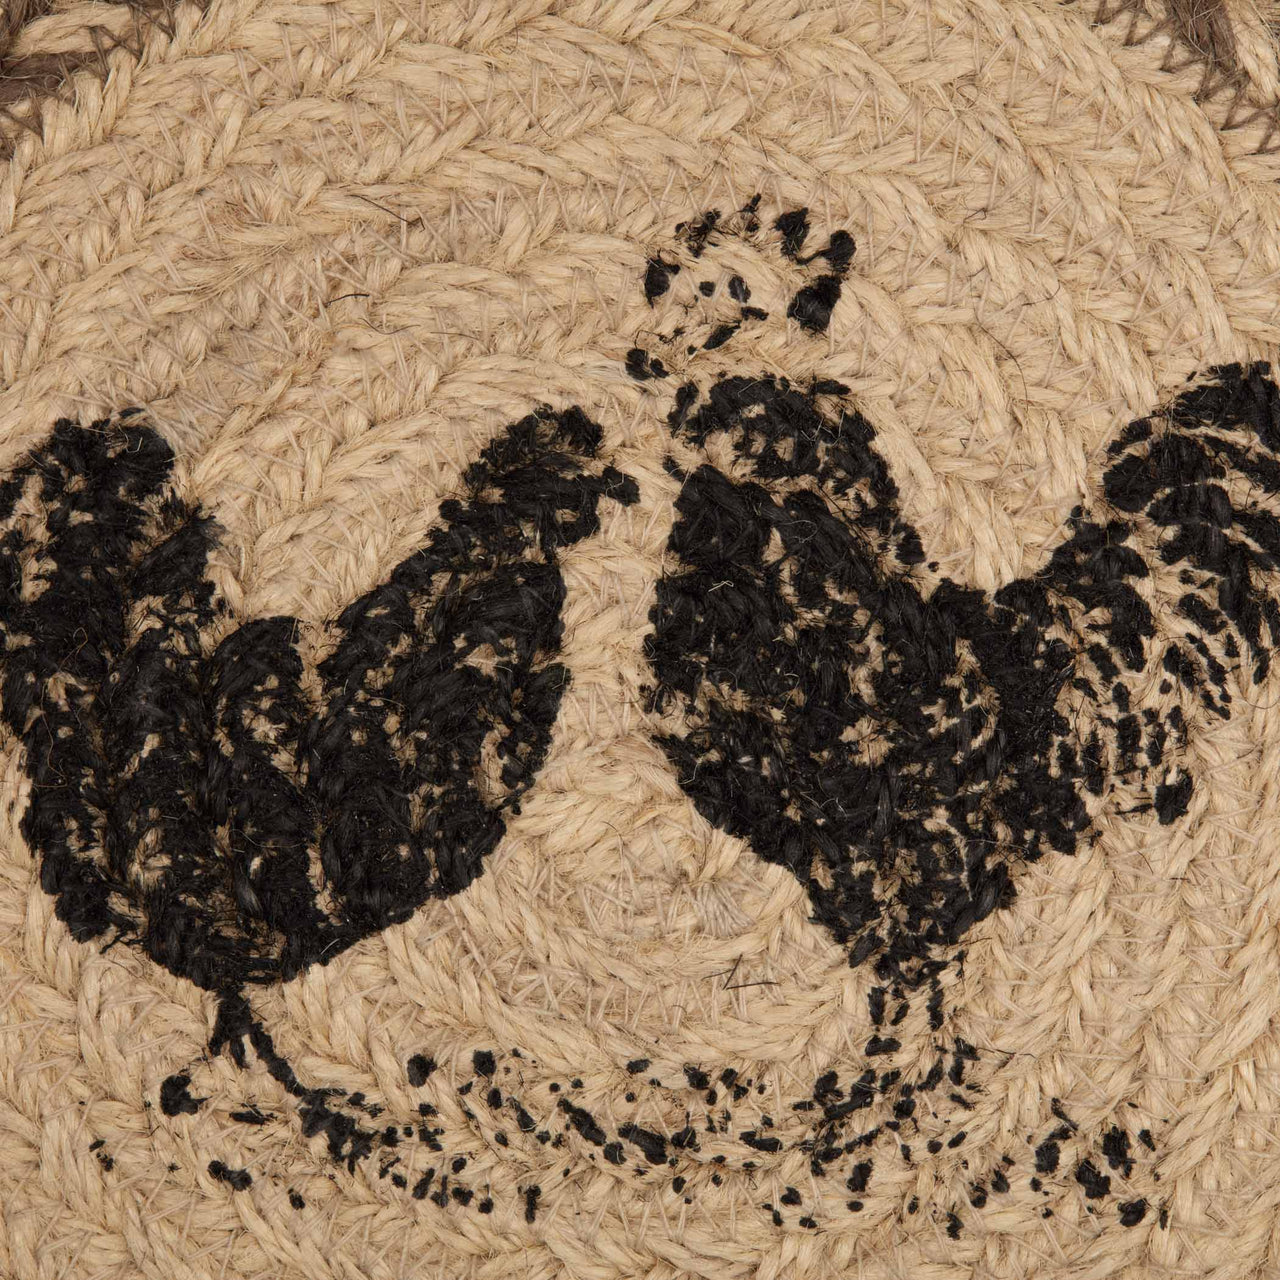 Sawyer Mill Charcoal Poultry Jute Trivet 8" VHC Brands